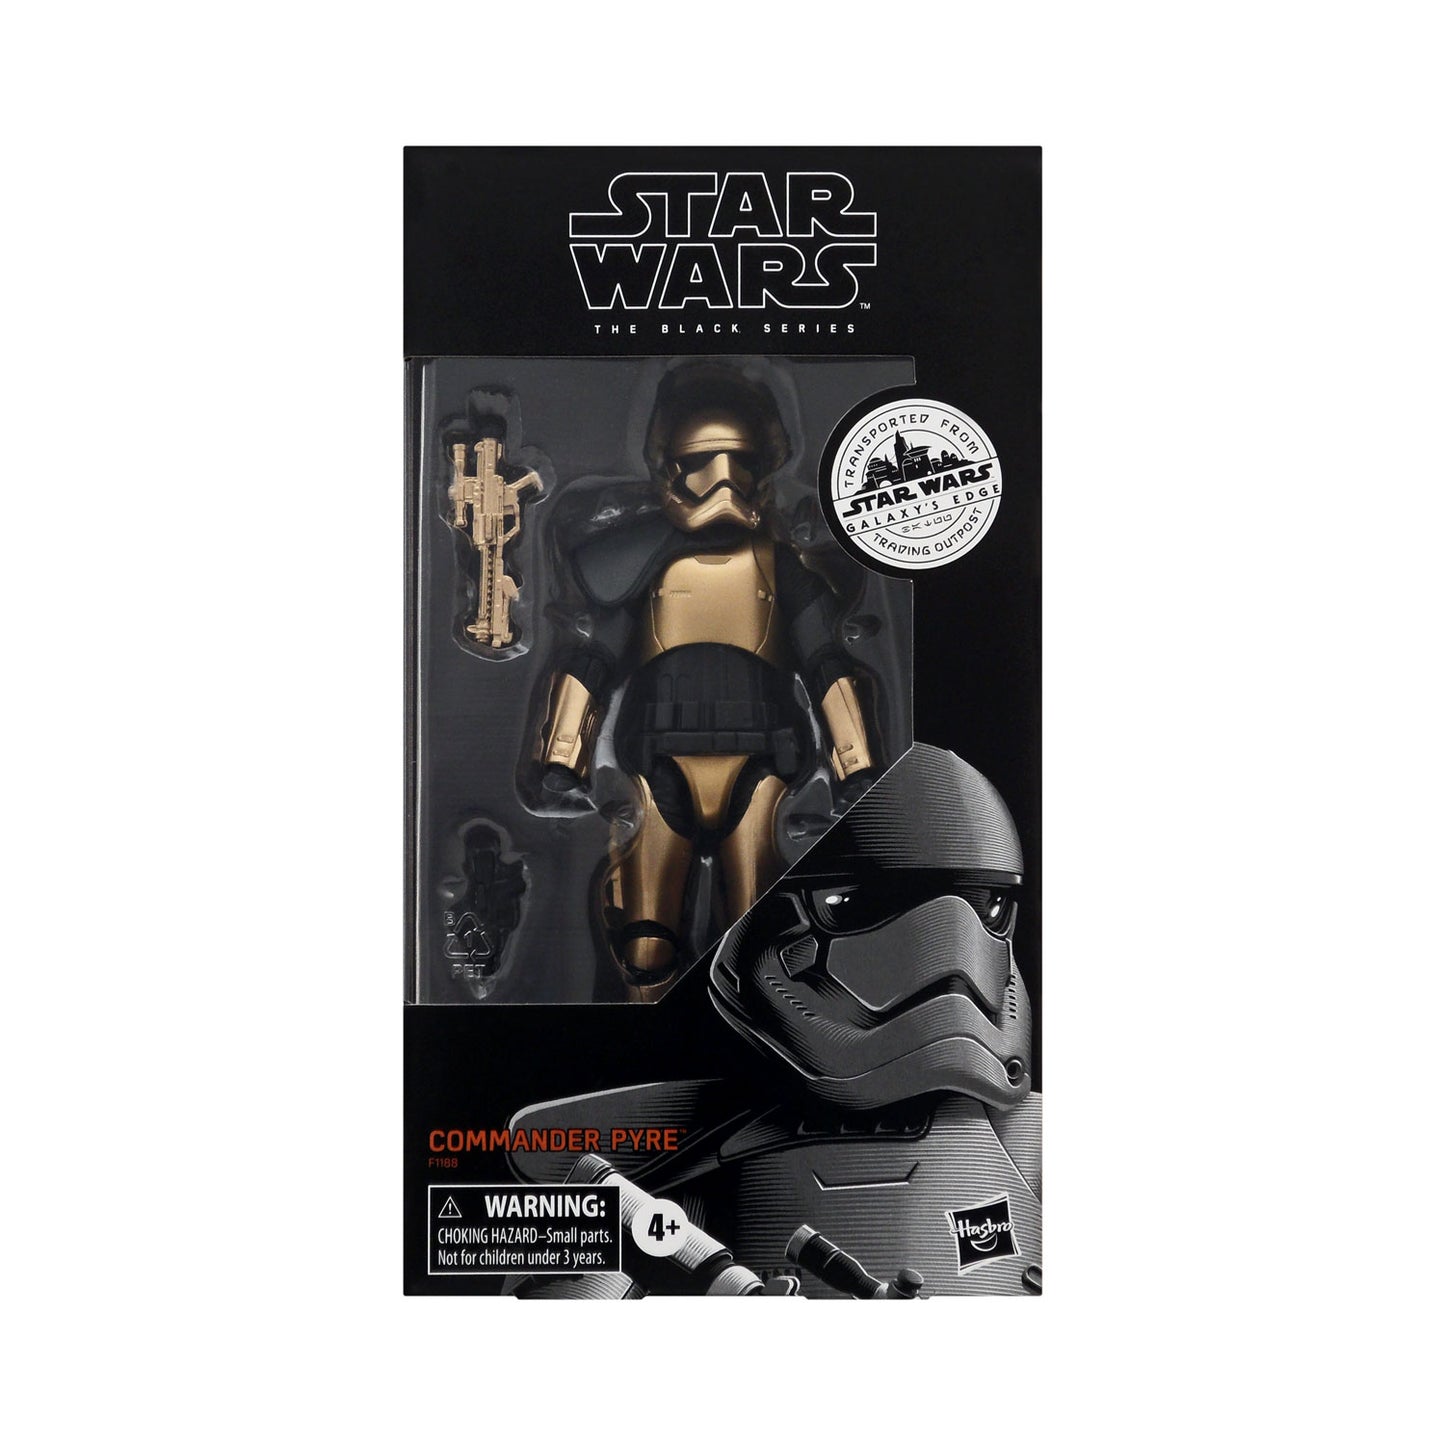 Star Wars: The Black Series Commander Pyre Exclusive 6-Inch Action Figure